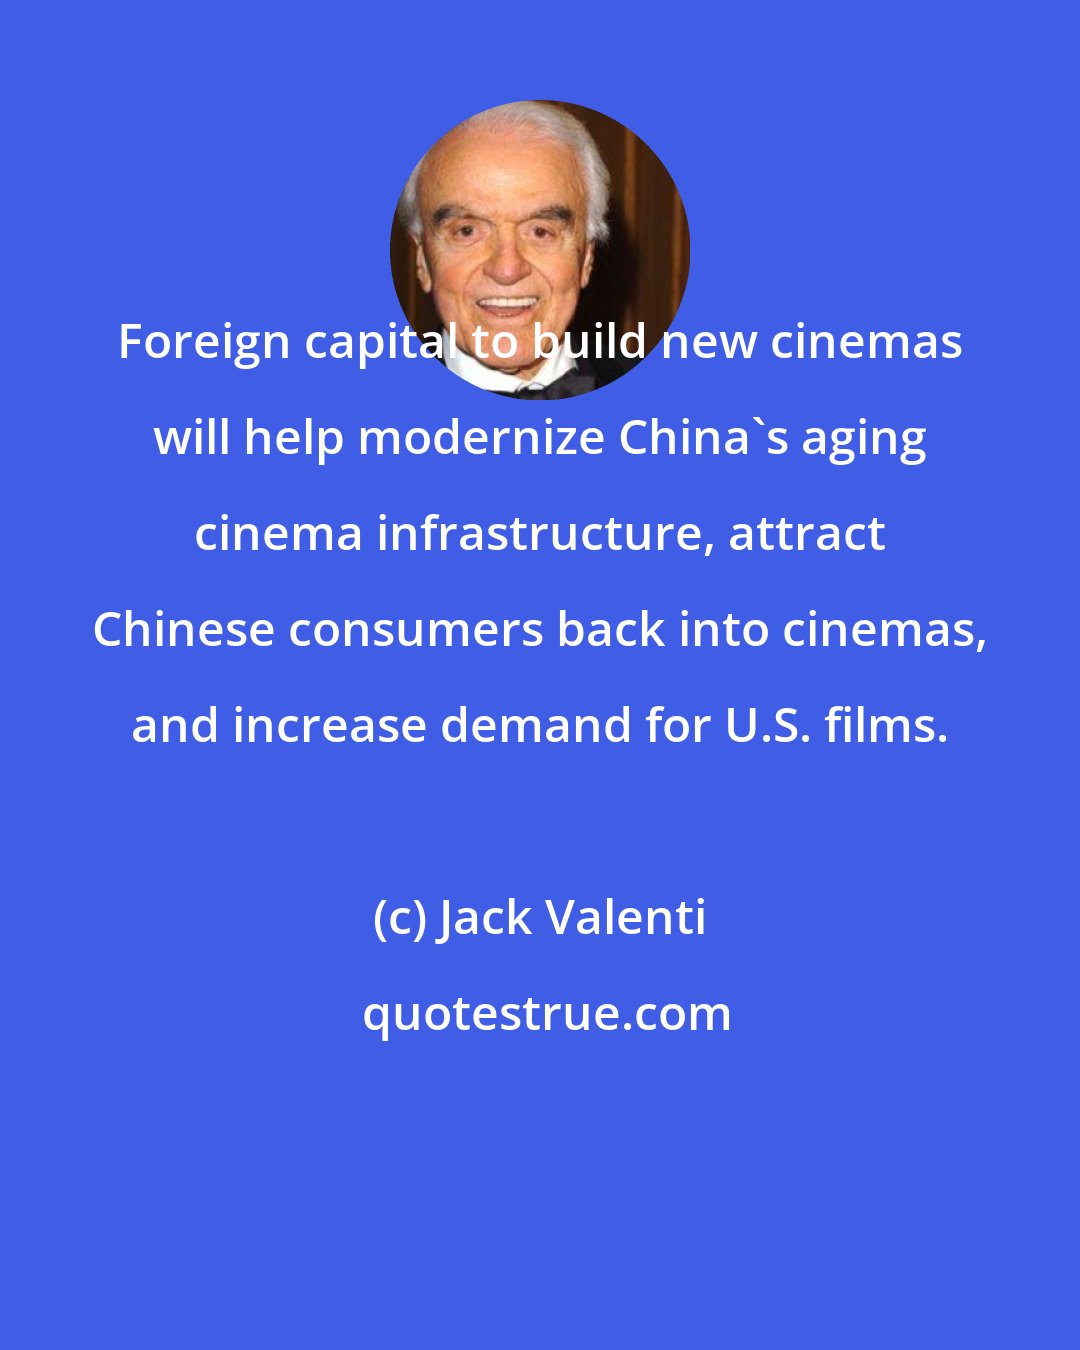 Jack Valenti: Foreign capital to build new cinemas will help modernize China's aging cinema infrastructure, attract Chinese consumers back into cinemas, and increase demand for U.S. films.